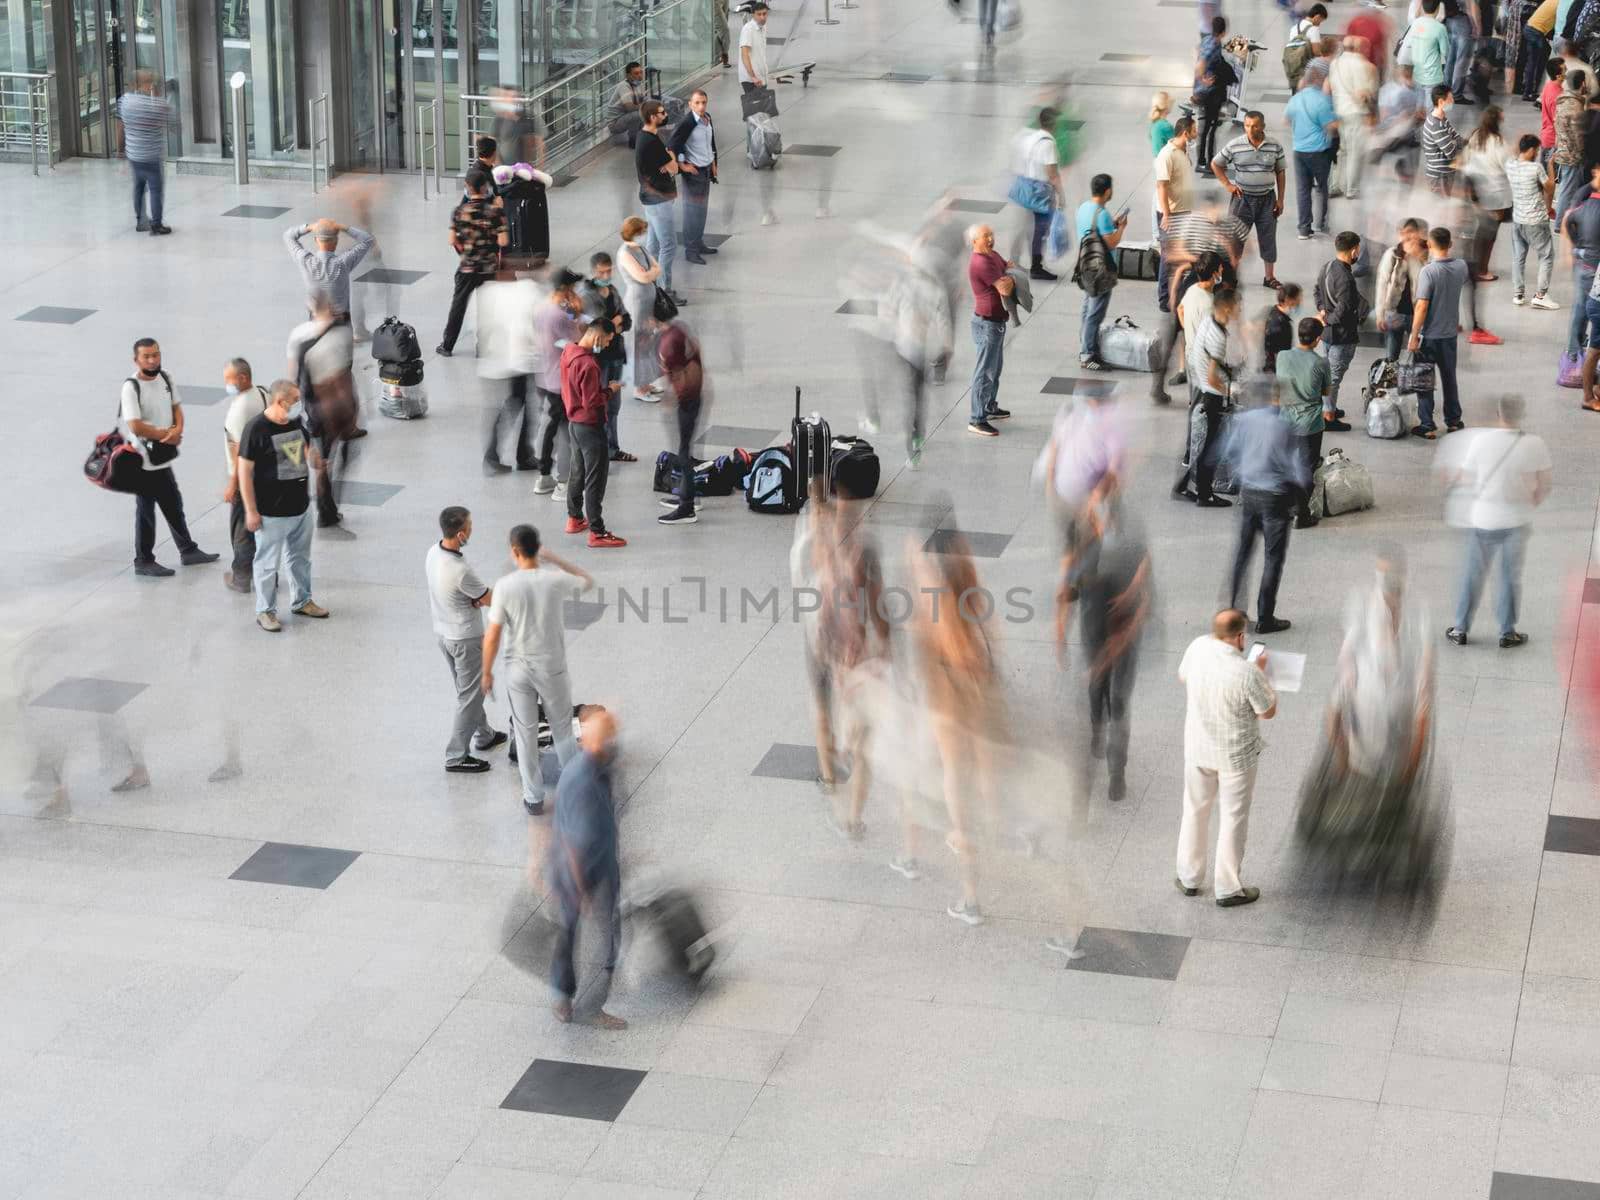 MOSCOW, RUSSIA - June 28, 2021. Moving people on first floor at Domodedovo airport hall. Long exposure.